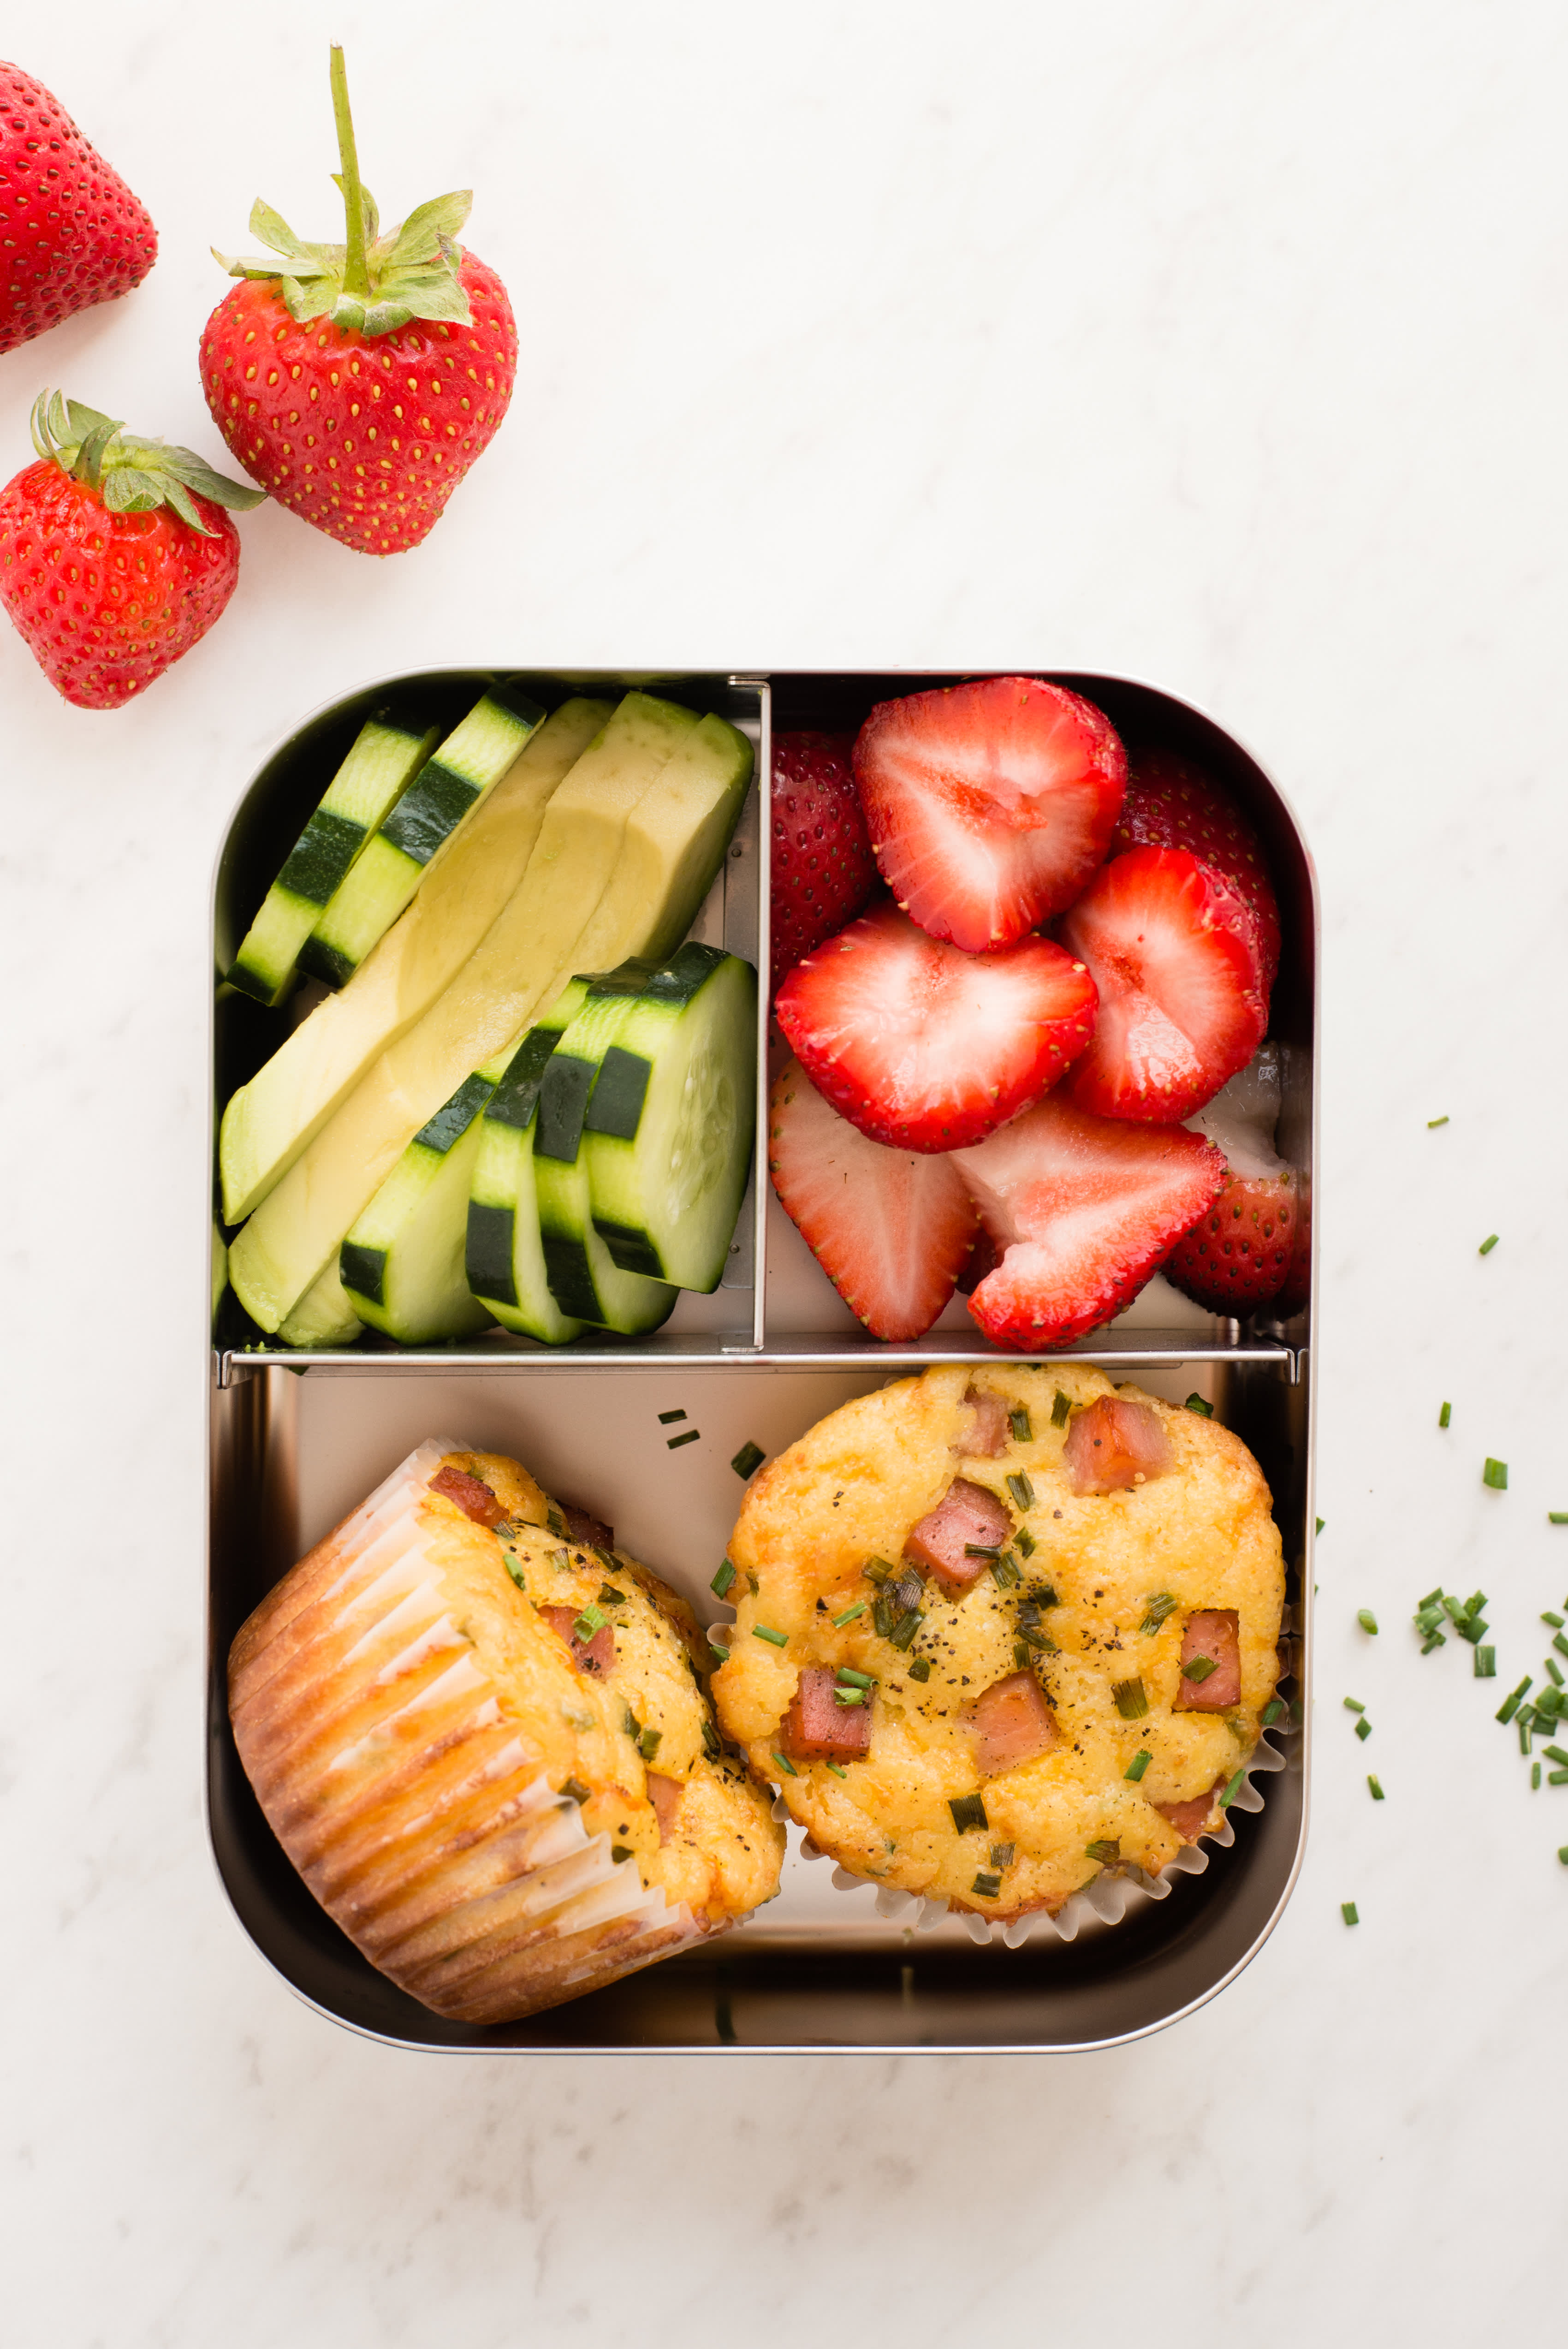 lunch box ideas for kids